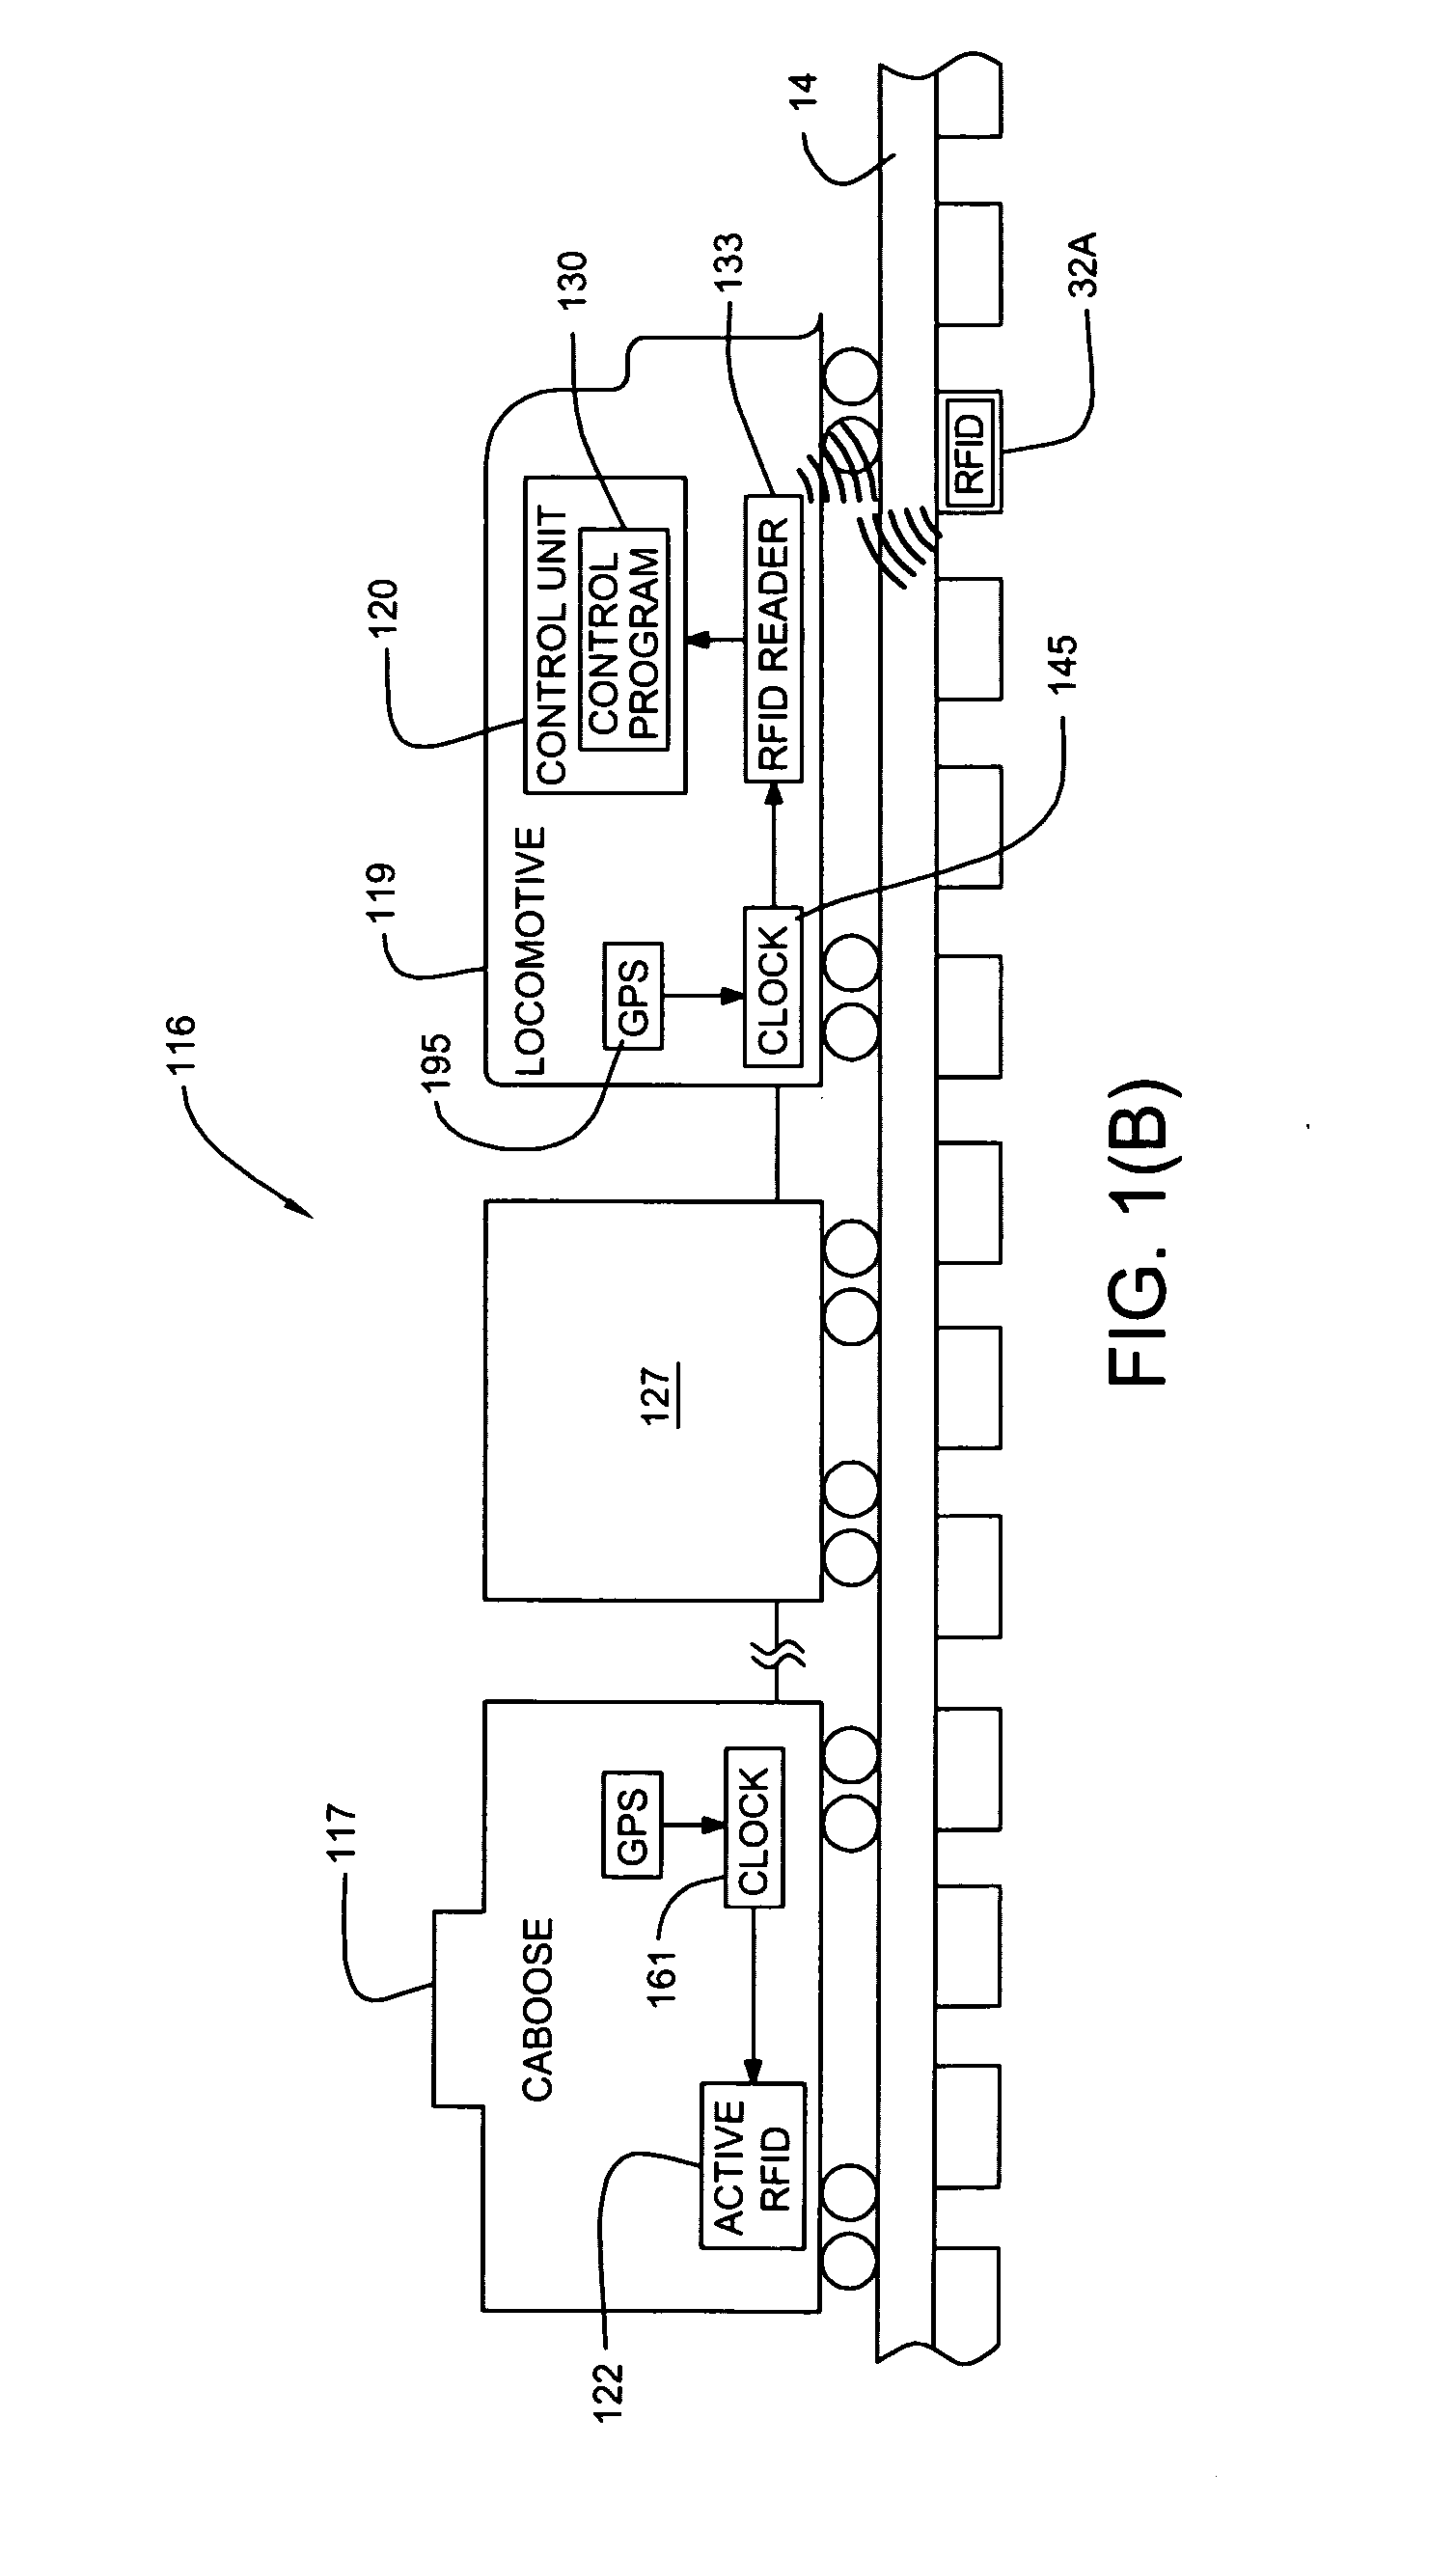 System and method for sensing and controlling spacing between railroad trains